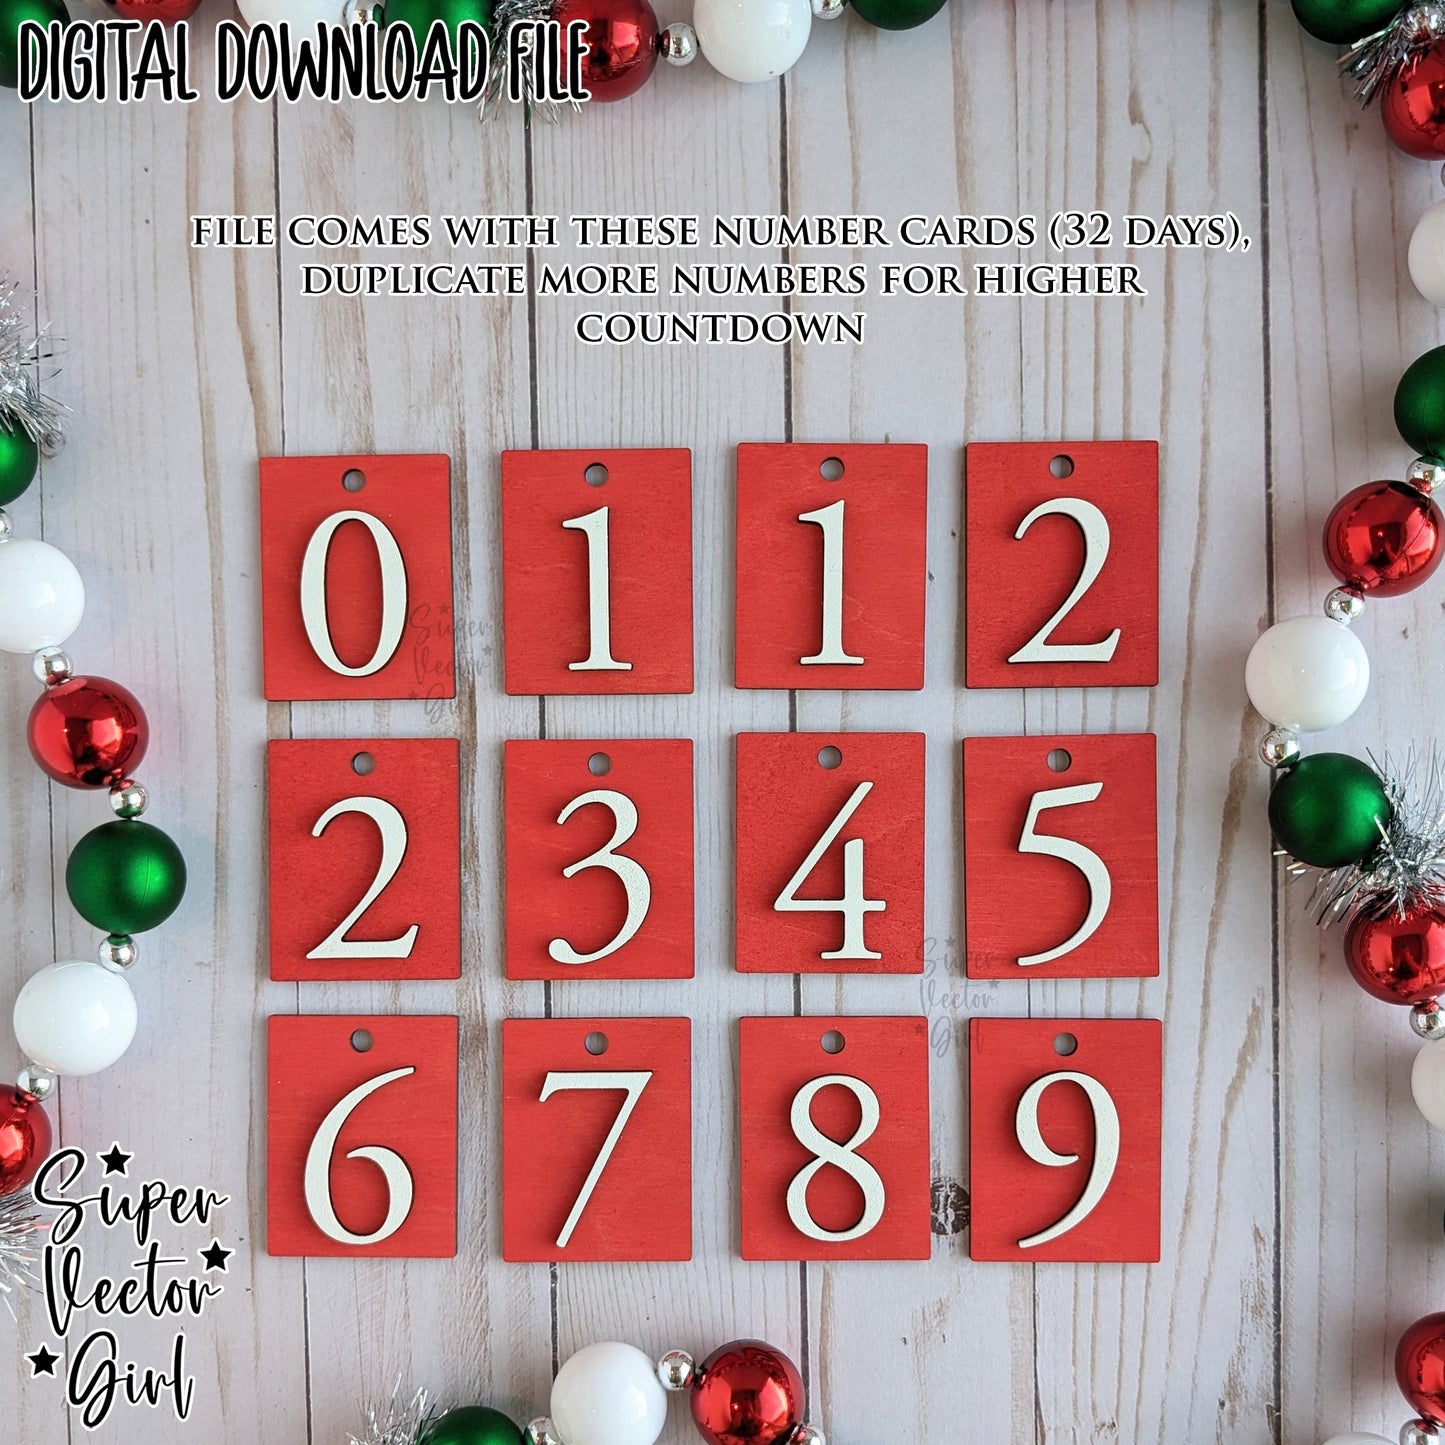 Christmas Countdown House, SVG, Laser Cut File files, Count down to Christmas, Advent Calendar, Farmhouse Rustic, Wooden Home, Wreath Tree